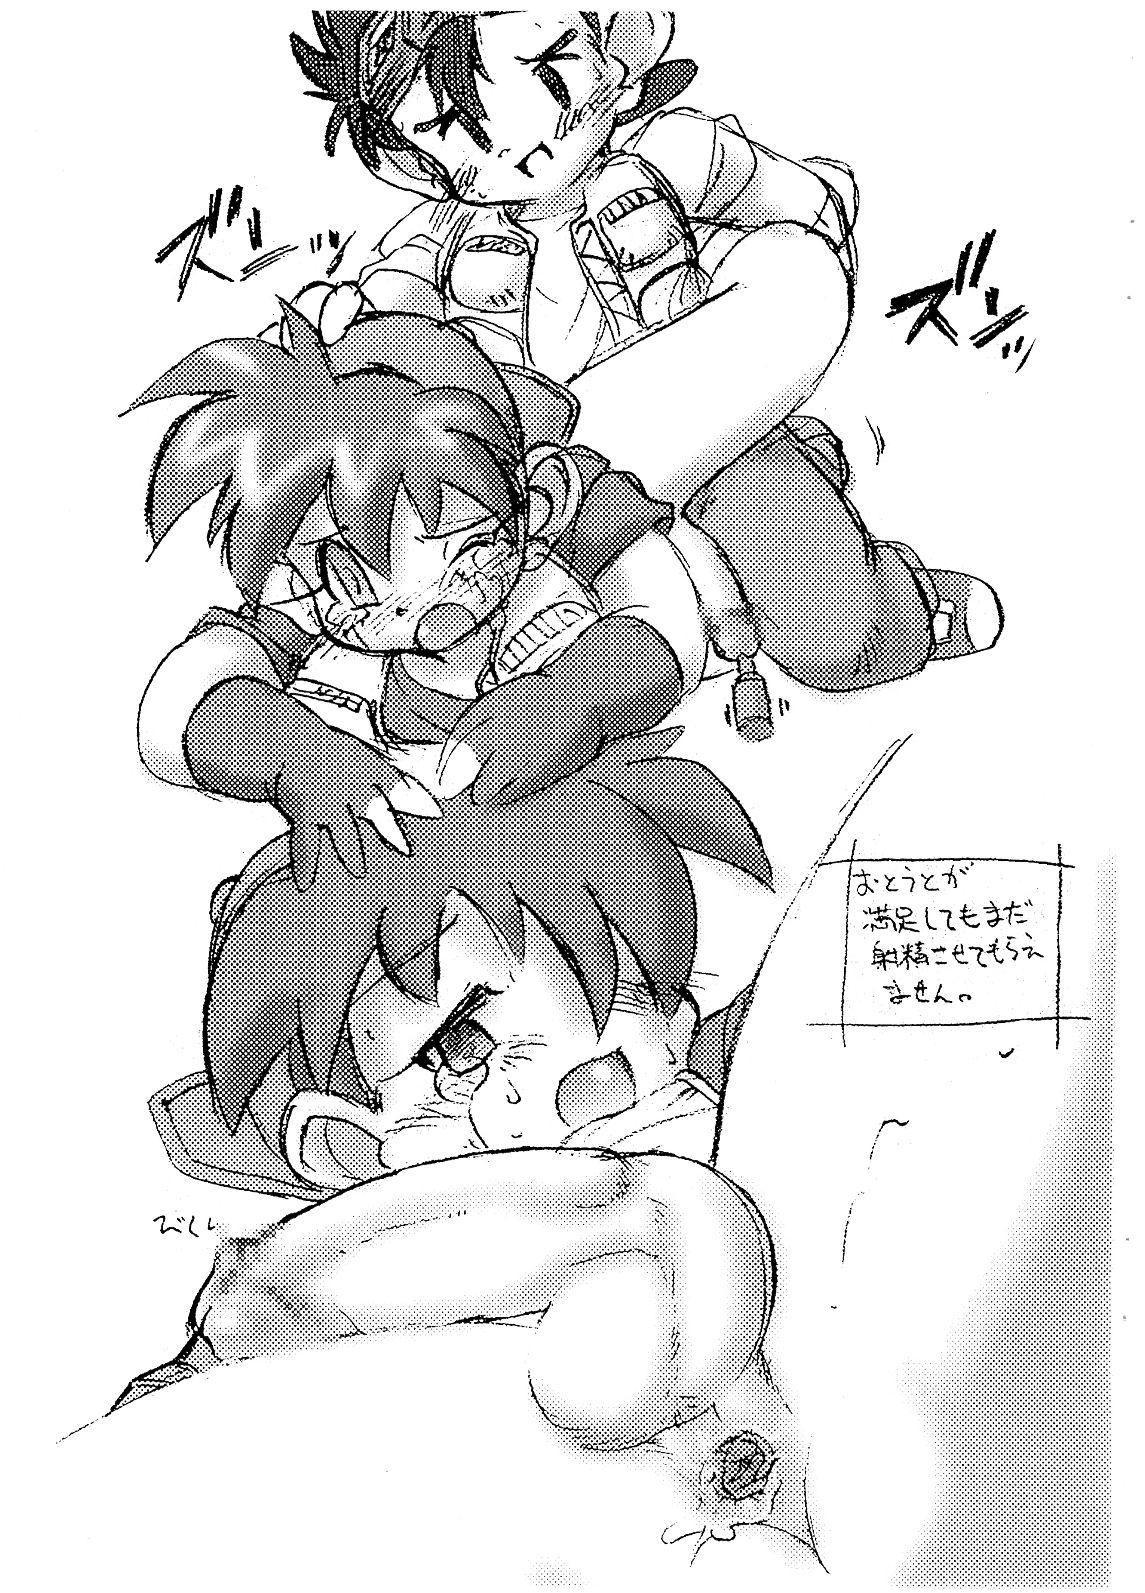 All TOUCH DASH! + Omake - The legend of zelda Bakusou kyoudai lets and go Mature Woman - Page 4